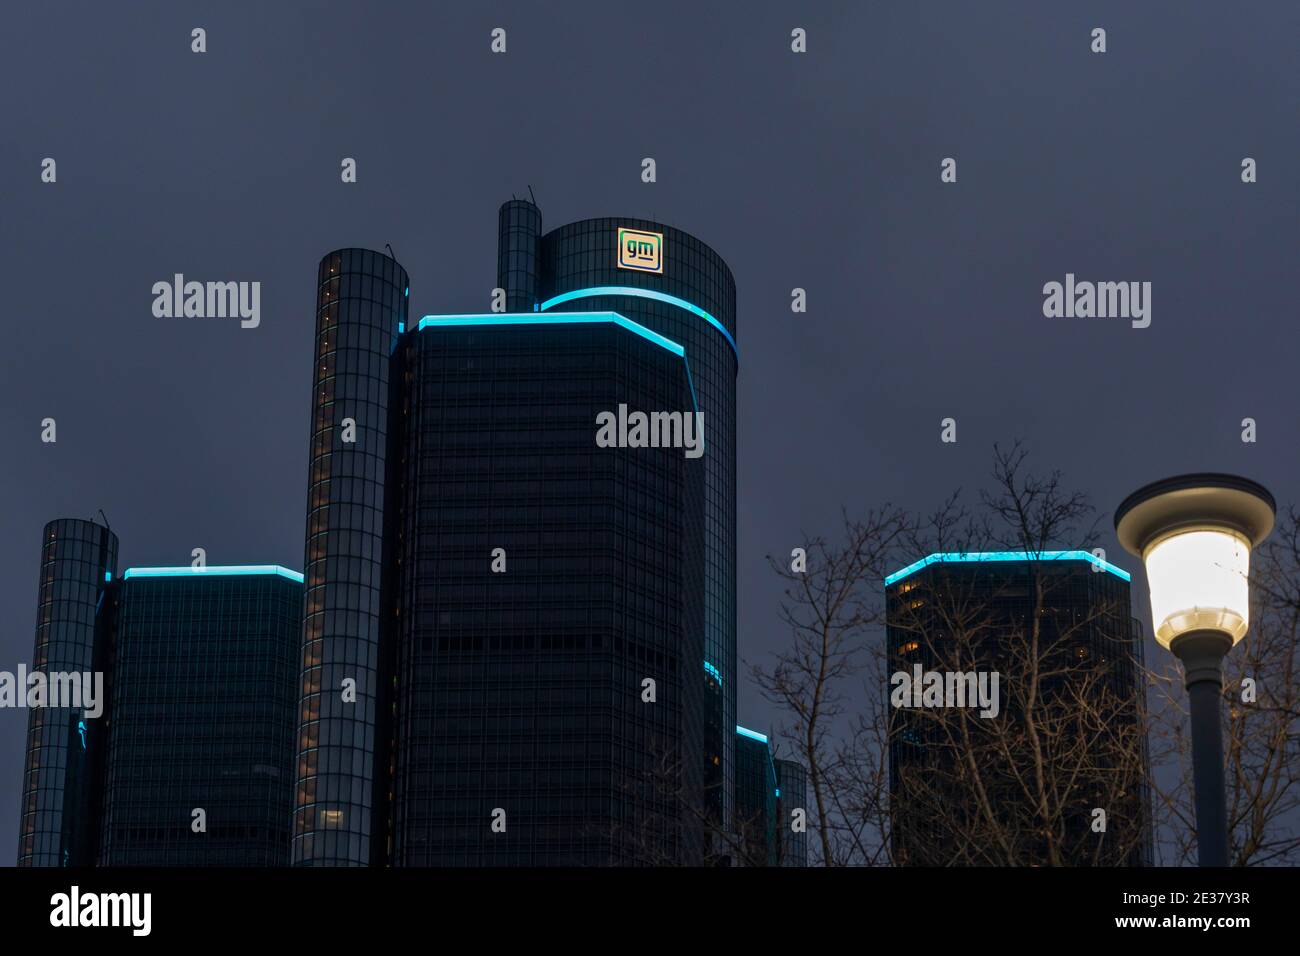 Detroit, Michigan, USA. 16th Jan, 2021. The new General Motors logo, on display at the GM headquarters in Detroit's Renaissance Center. The company says the logo symbolizes its move towards building electric vehicles. Credit: Jim West/Alamy Live News Stock Photo